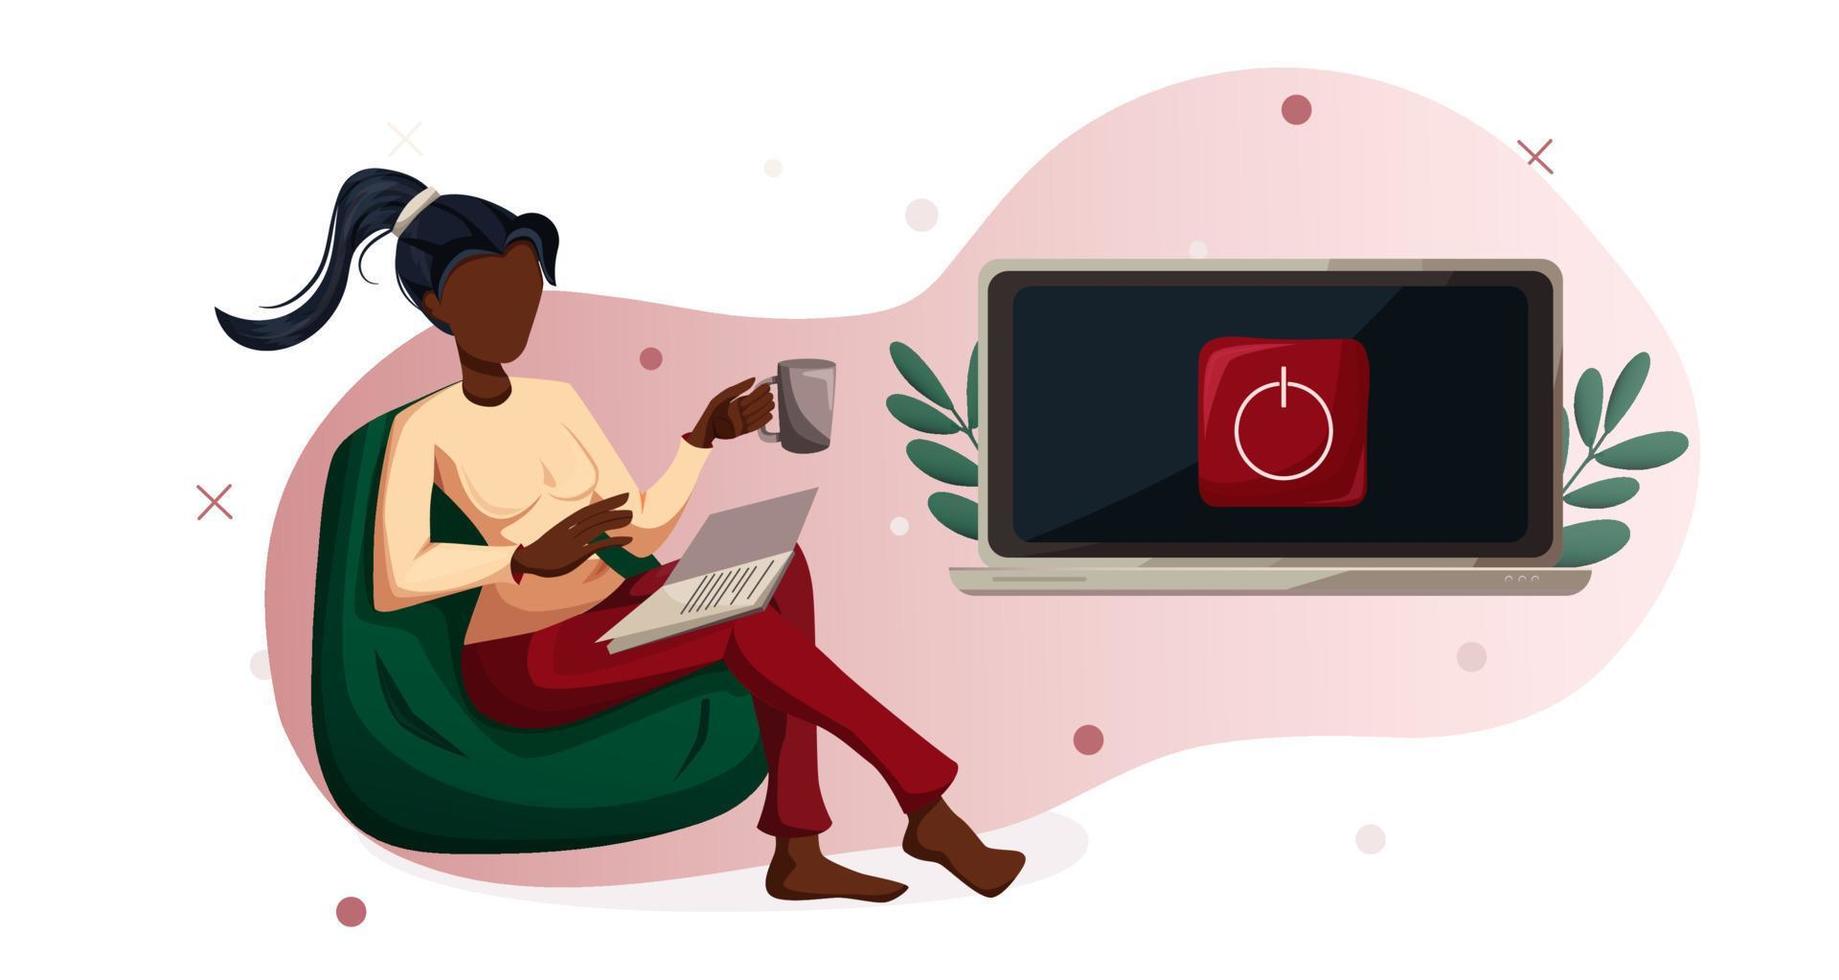 National Day of Unplugging. a black woman is reading a book, the computer is turned off. Concept illustration rejection of gadgets. vector